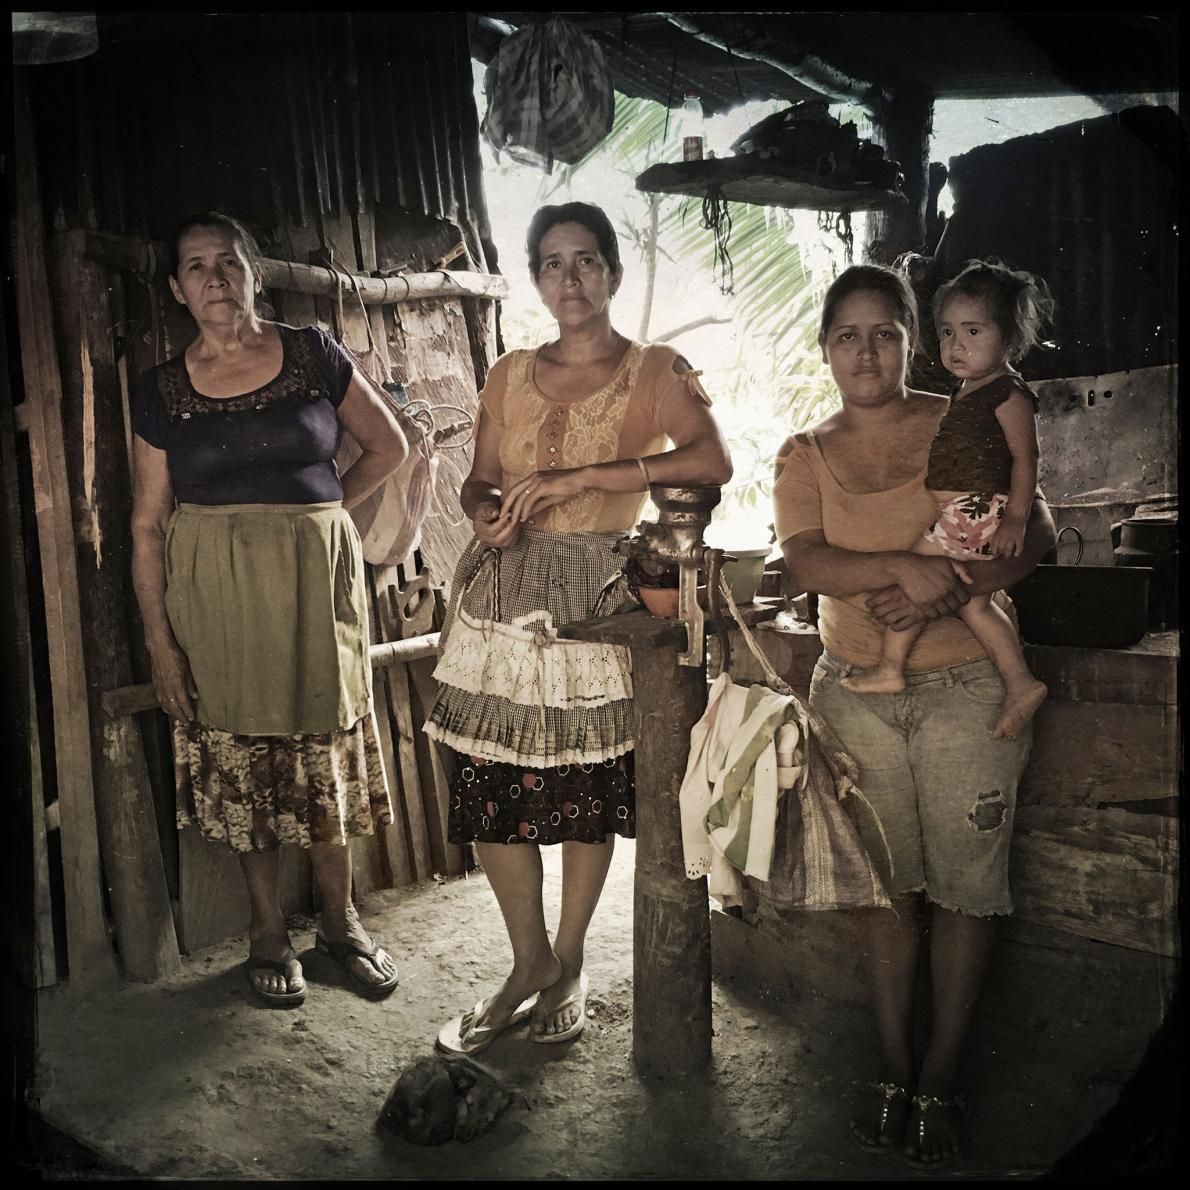 Las Brisas: Four generations depend on this large cook stove in the middle of their house. Most people in this community struggle daily to find wood and provisions to operate the stoves, which are not energy efficient. Image by Lynn Johnson. Guatemala, 2017.